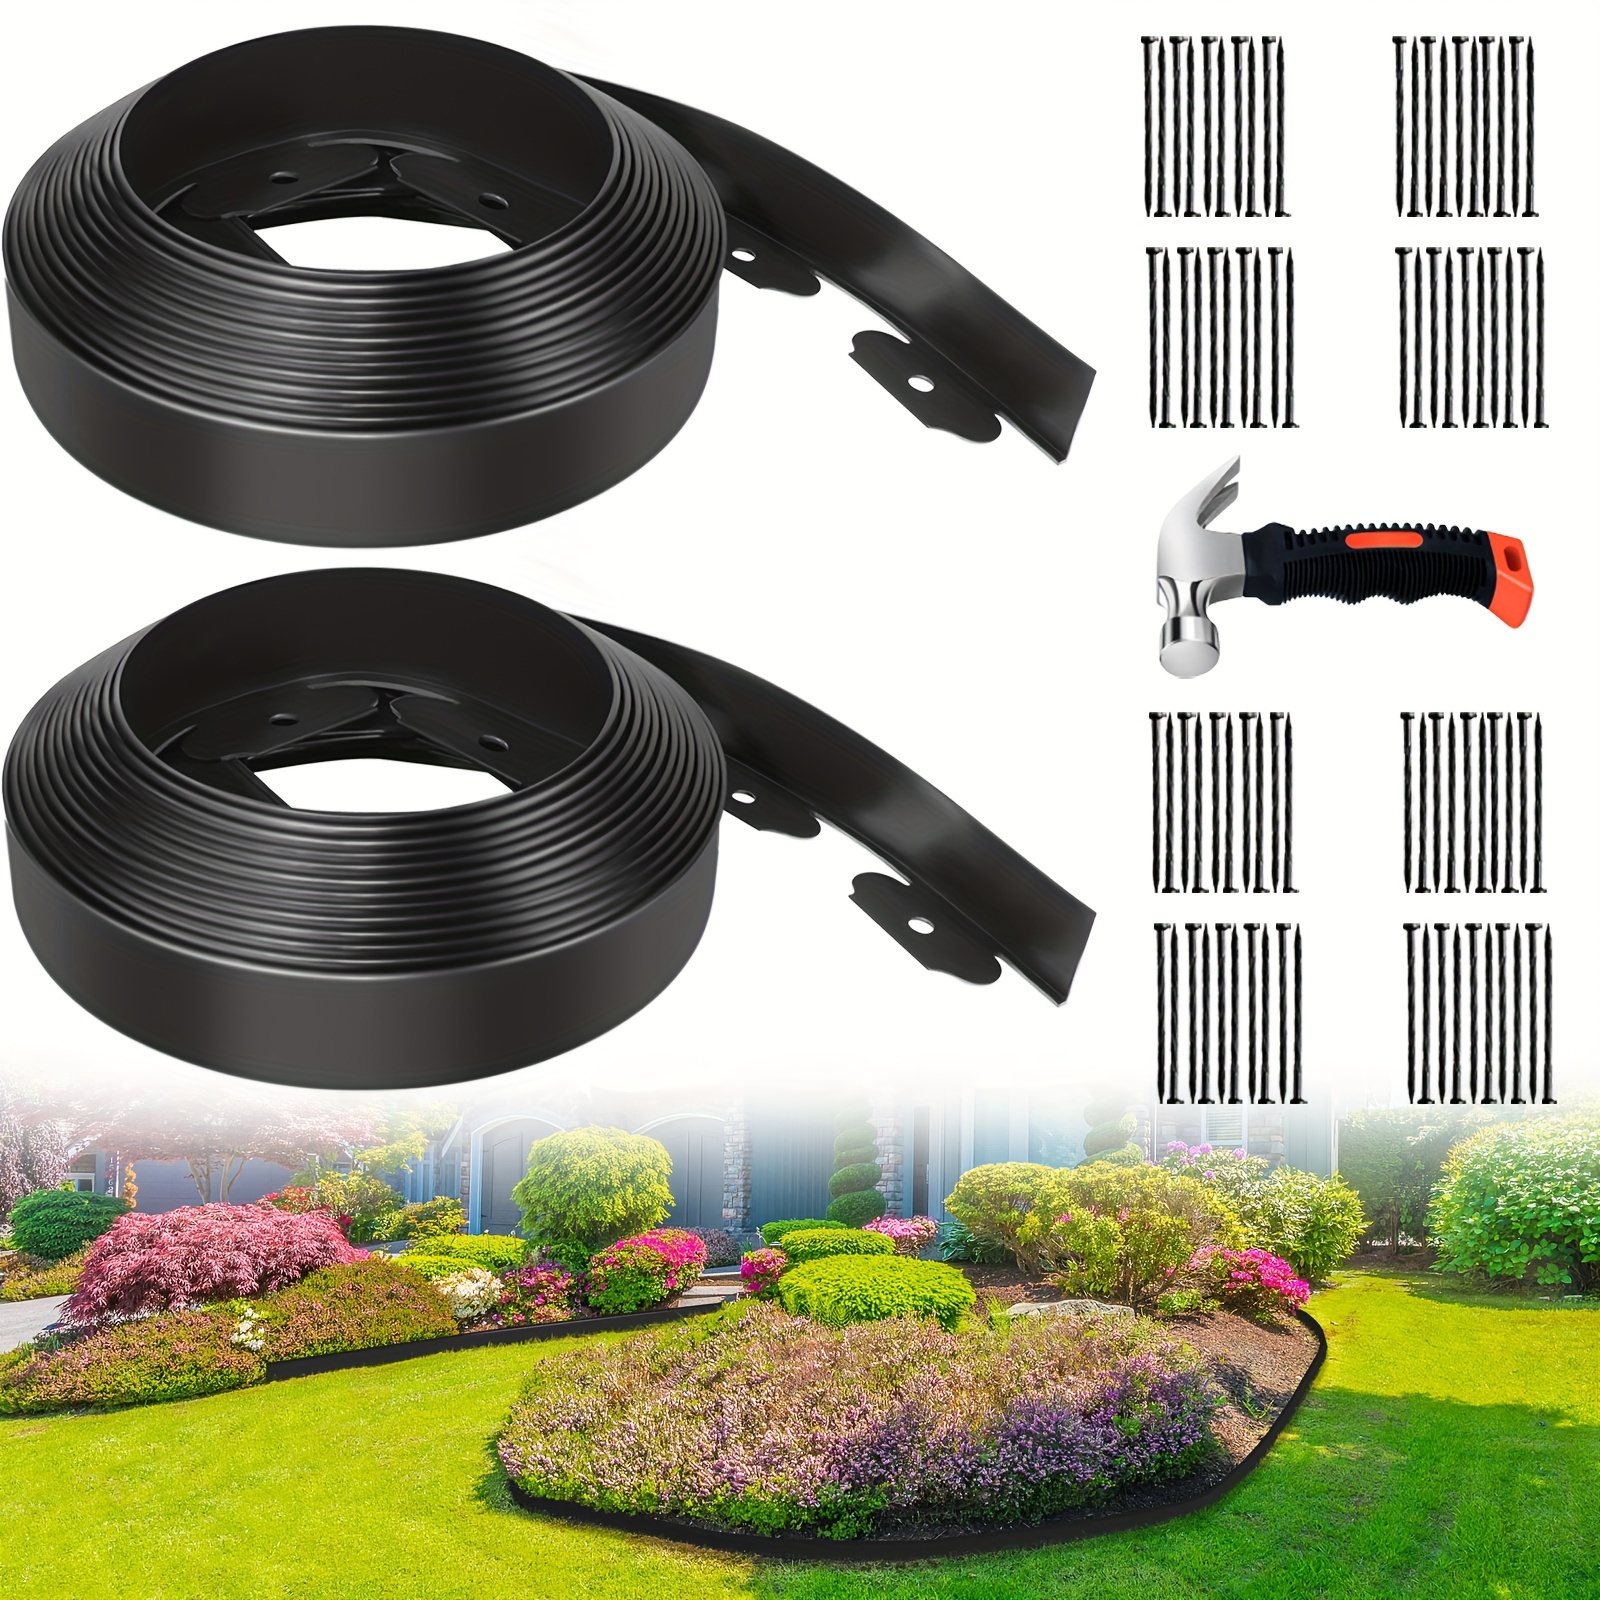 

Landscape Edging 2" X33' 2 Pack, With 80 Spike And 1 Hammer, Plastic Edging For Landscaping, Garden Edging Paver Edging Lawn Edging, Black